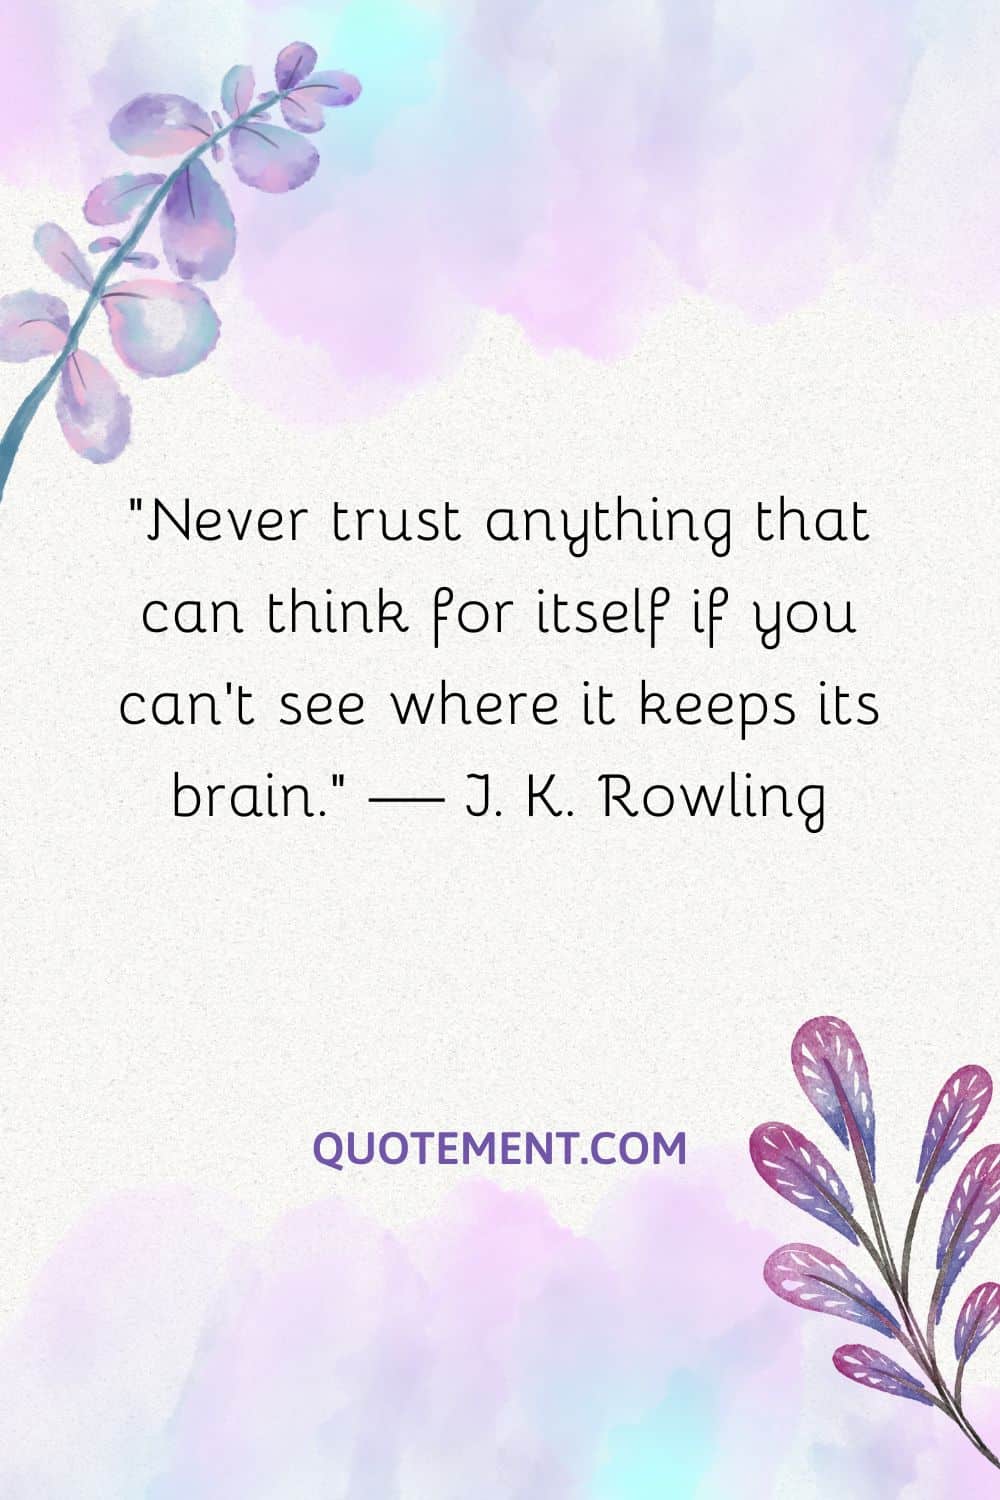 Never trust anything that can think for itself if you can’t see where it keeps its brain